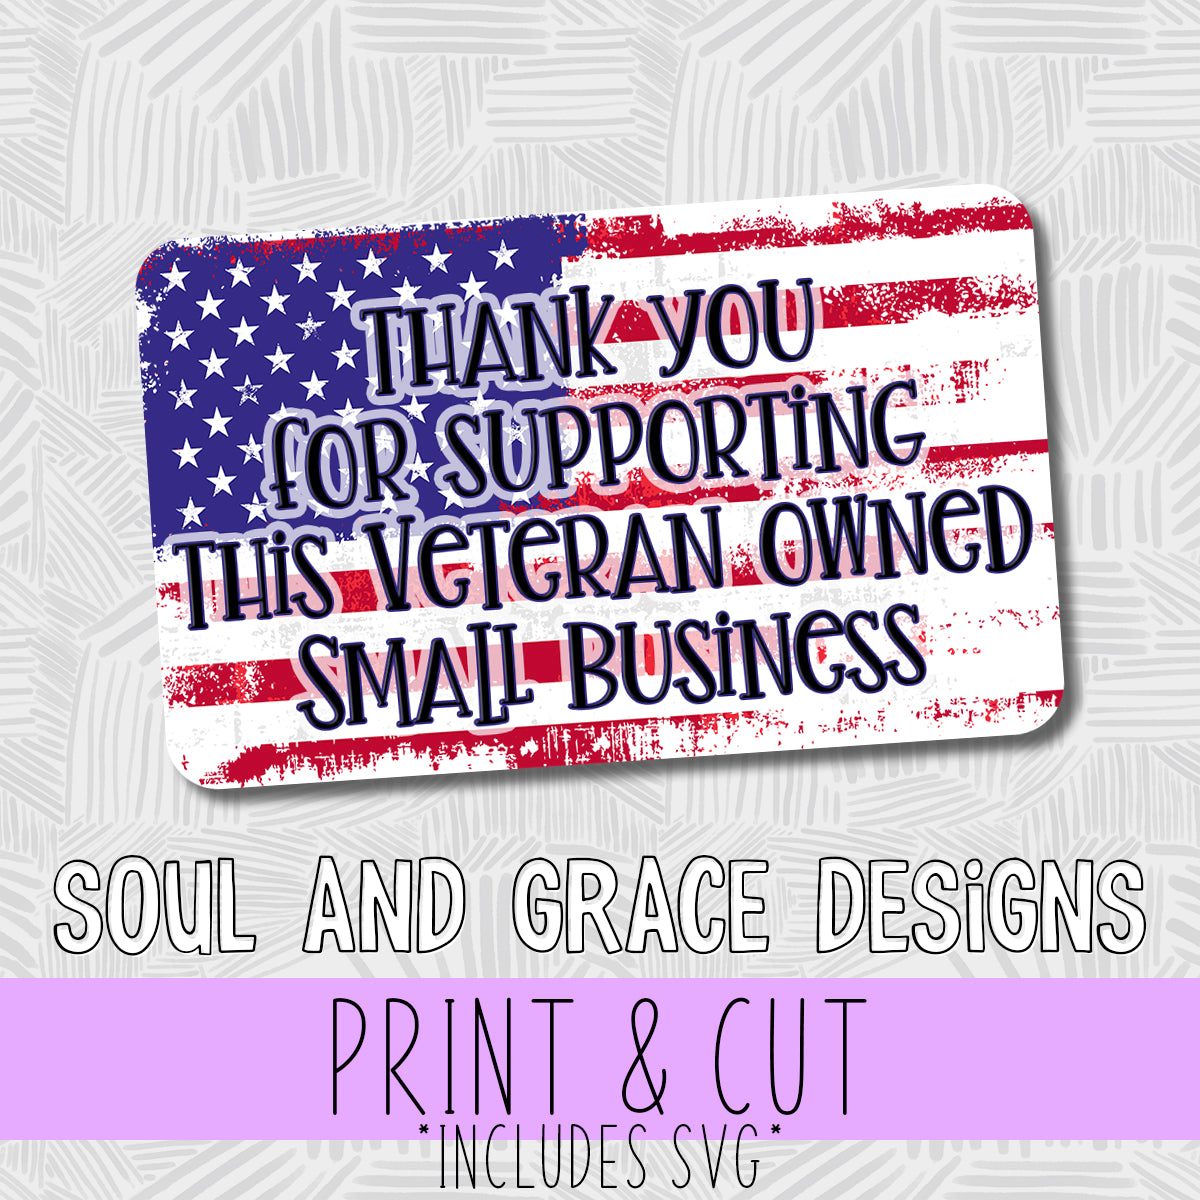 Thank You for Supporting This Veteran Owned Small Business